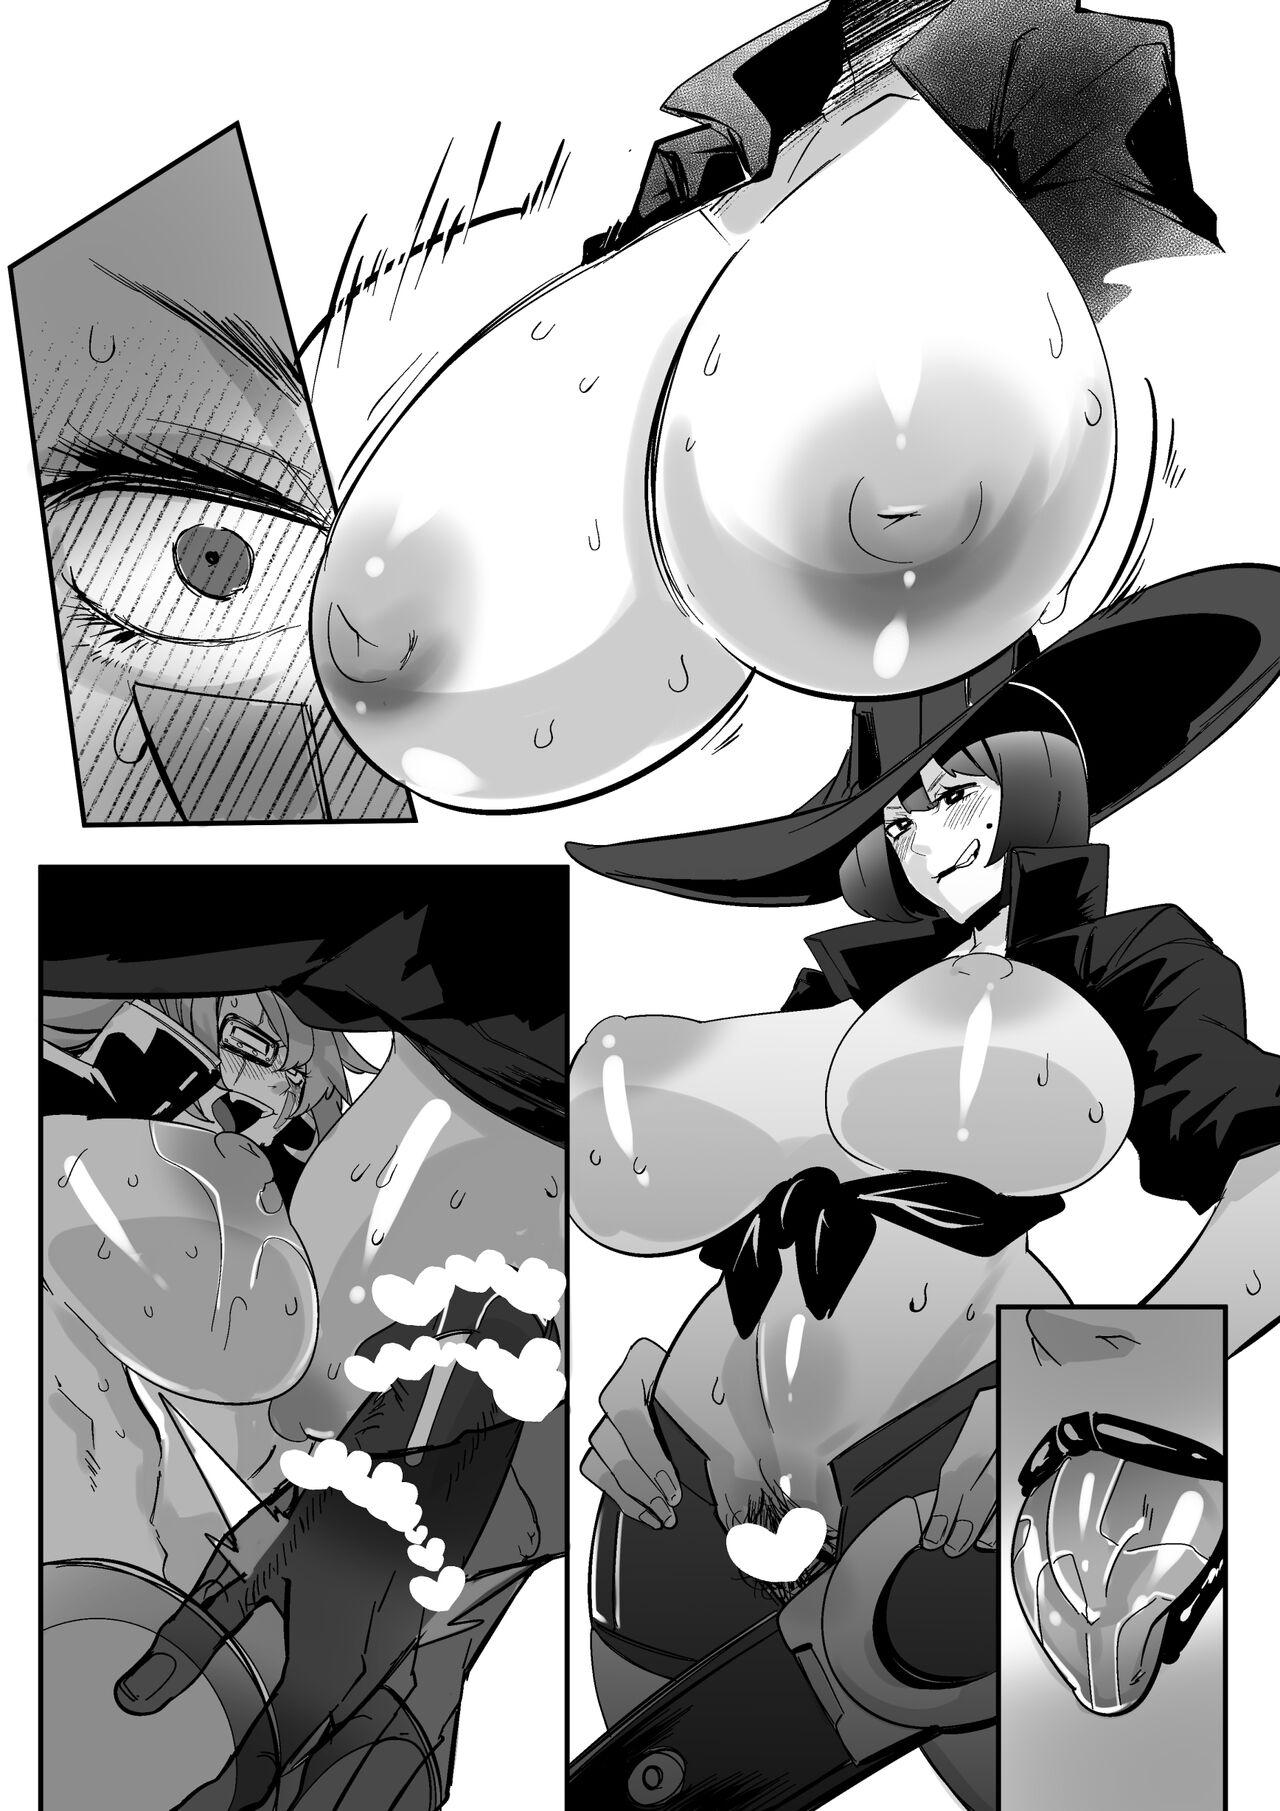 Free Hardcore Porn [Mr.way] 生えちゃった梅喧姐さんとイノ (ギルティギア)（Chinese） - Guilty gear Moreno - Page 8